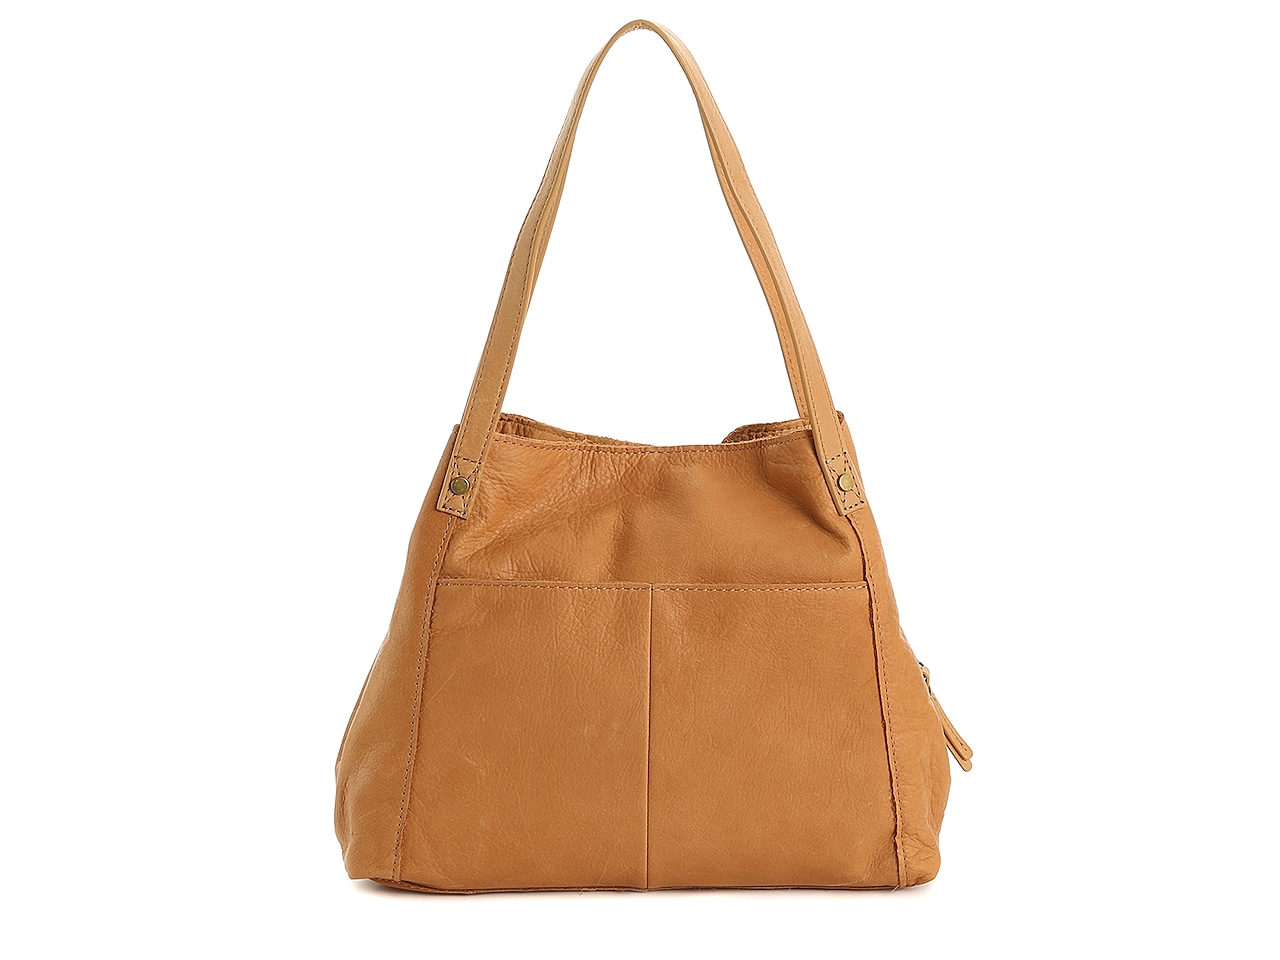 American Leather Co. Leather Shoulder Bag | DSW